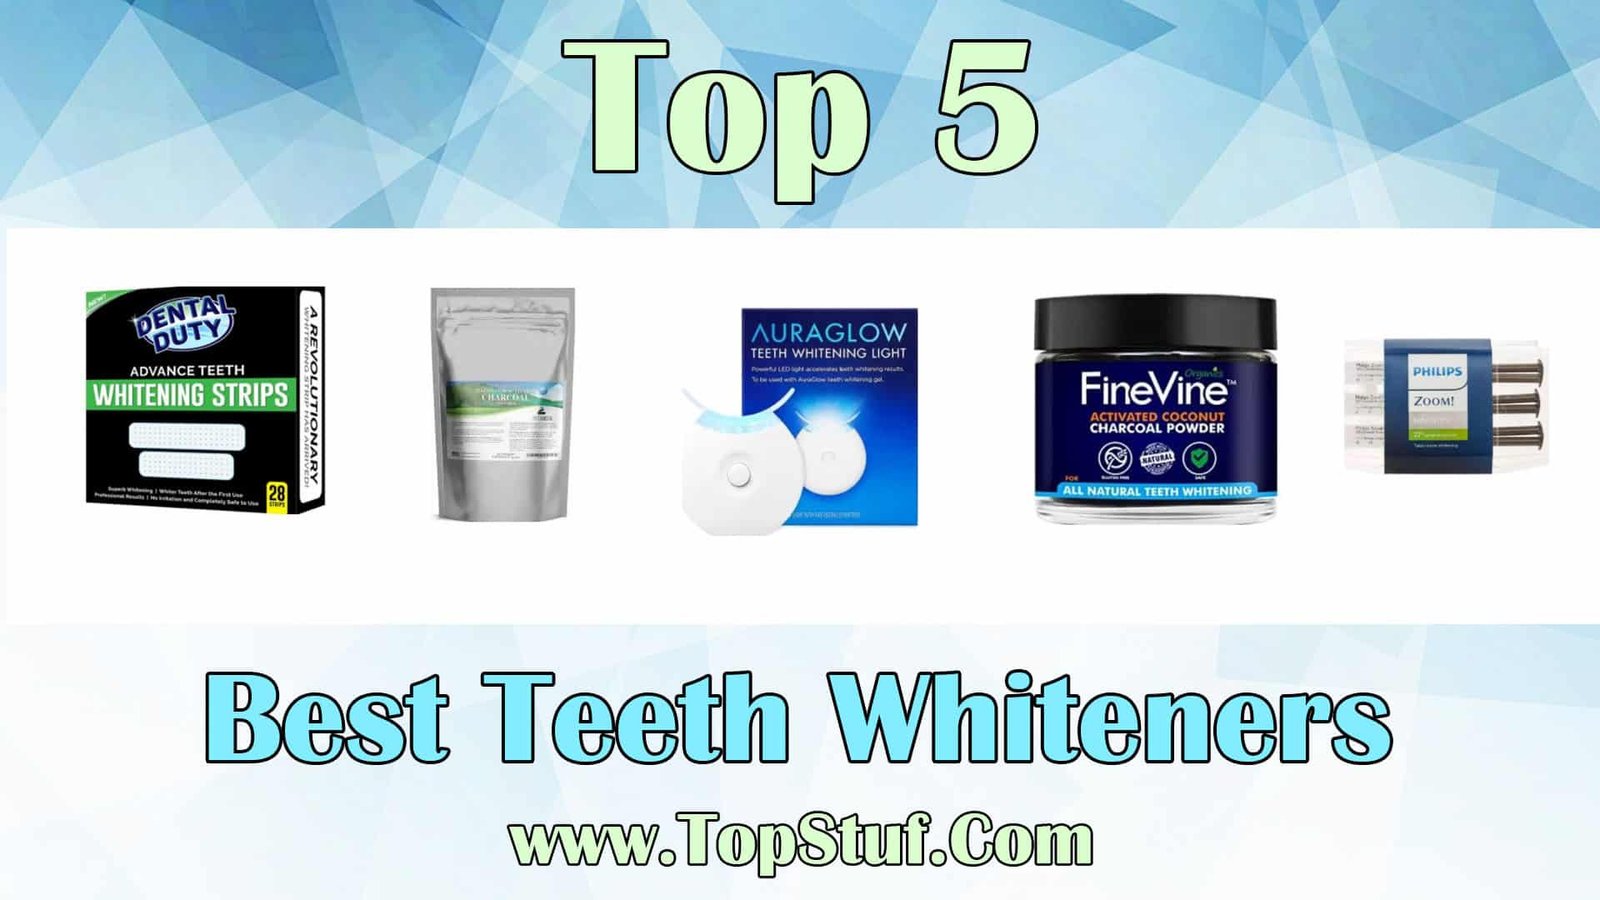 Best Teeth Whiteners 2020 Make your teeth shiny and white